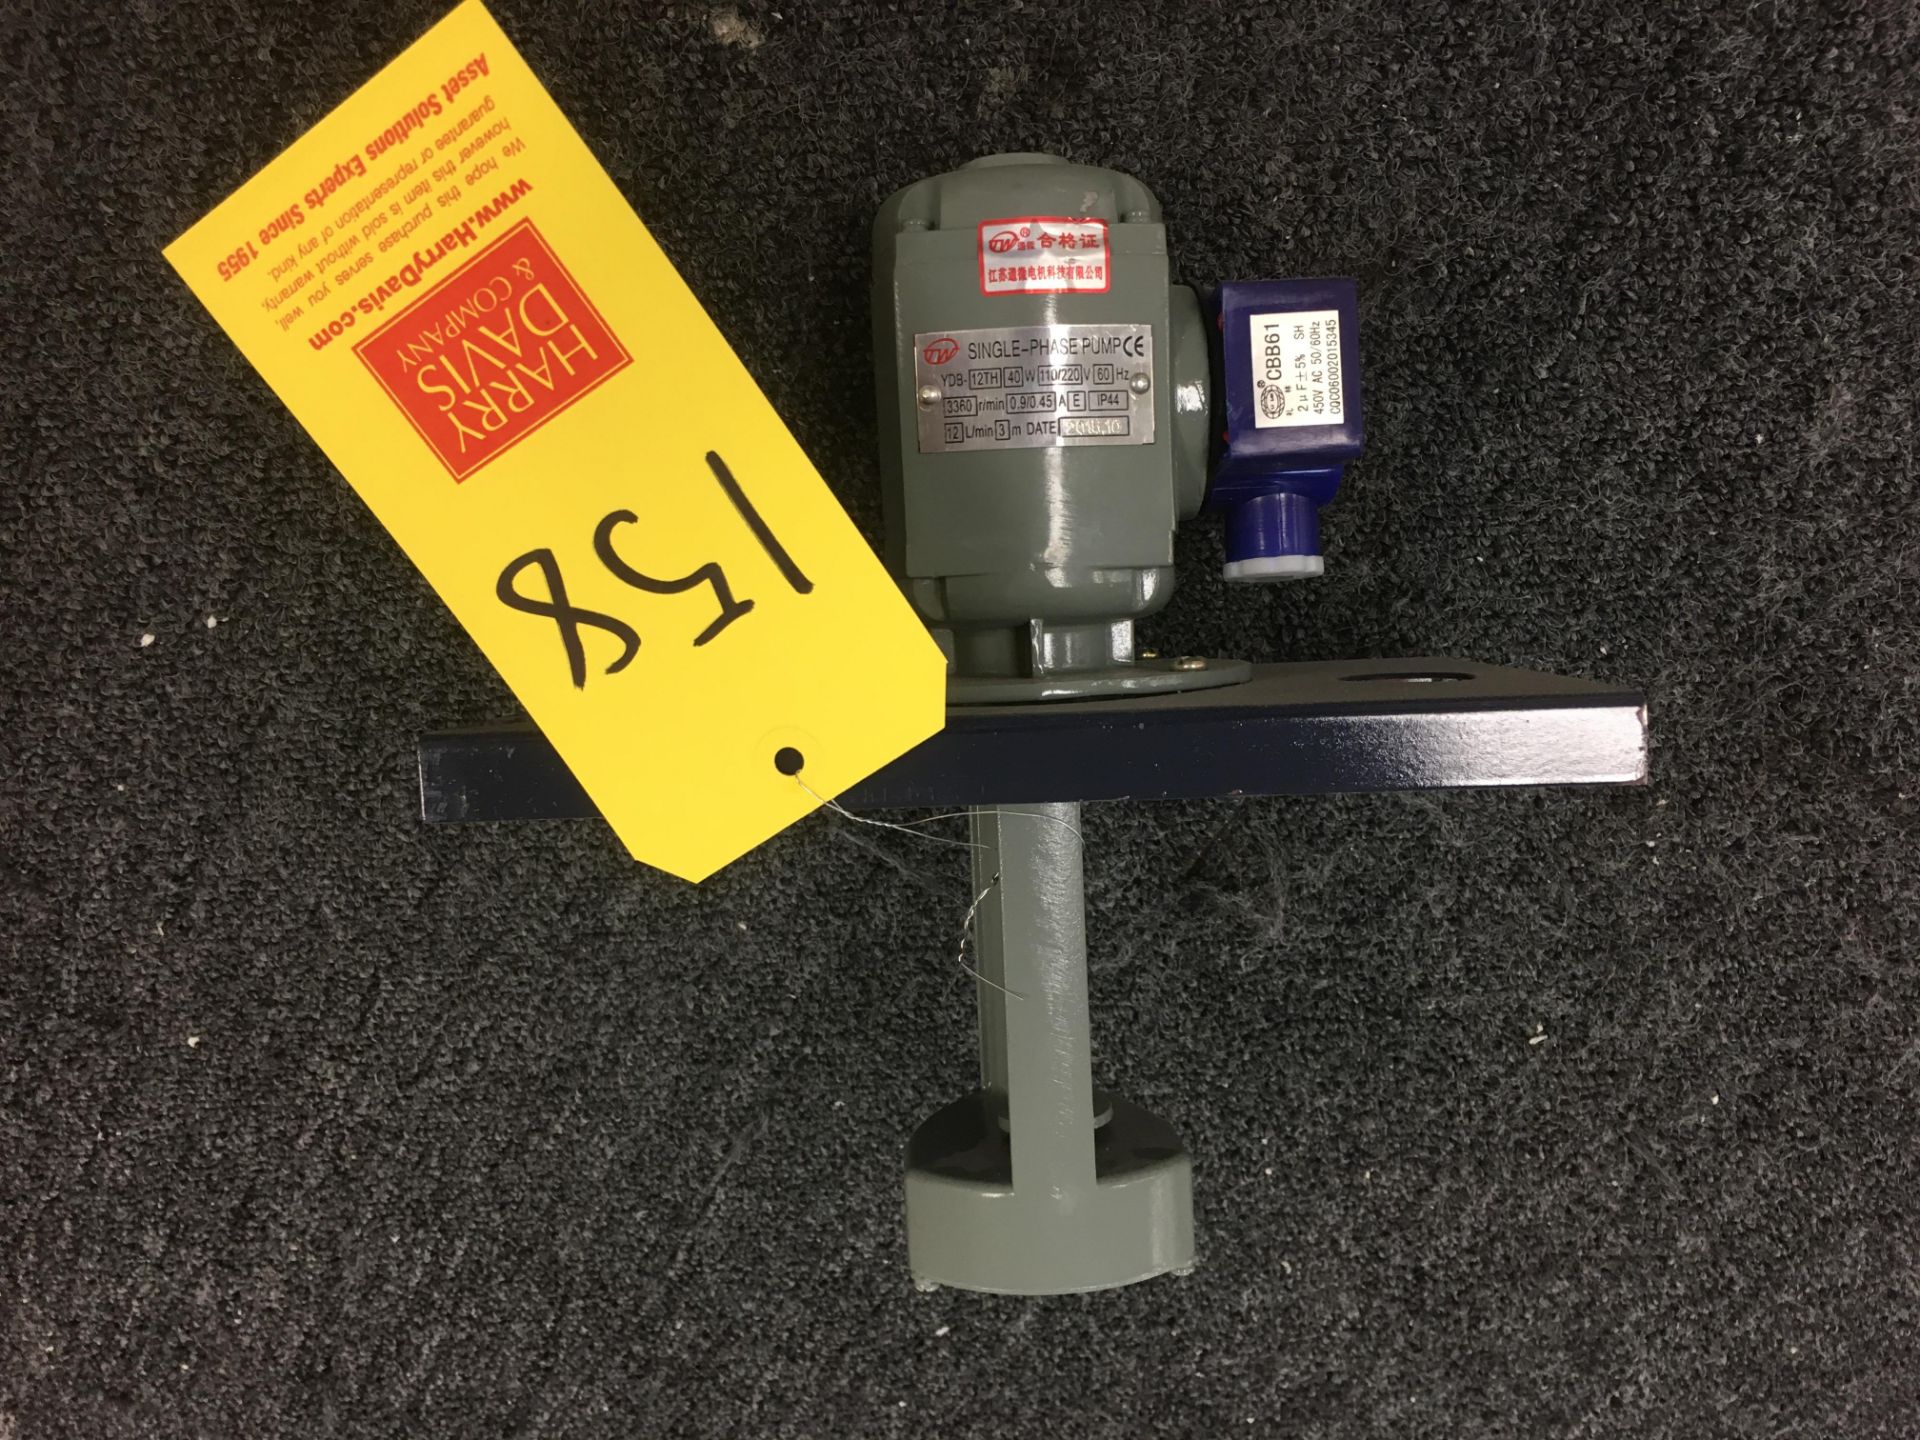 Single Phase Pump with 450 Volts Rigging Fee: $25